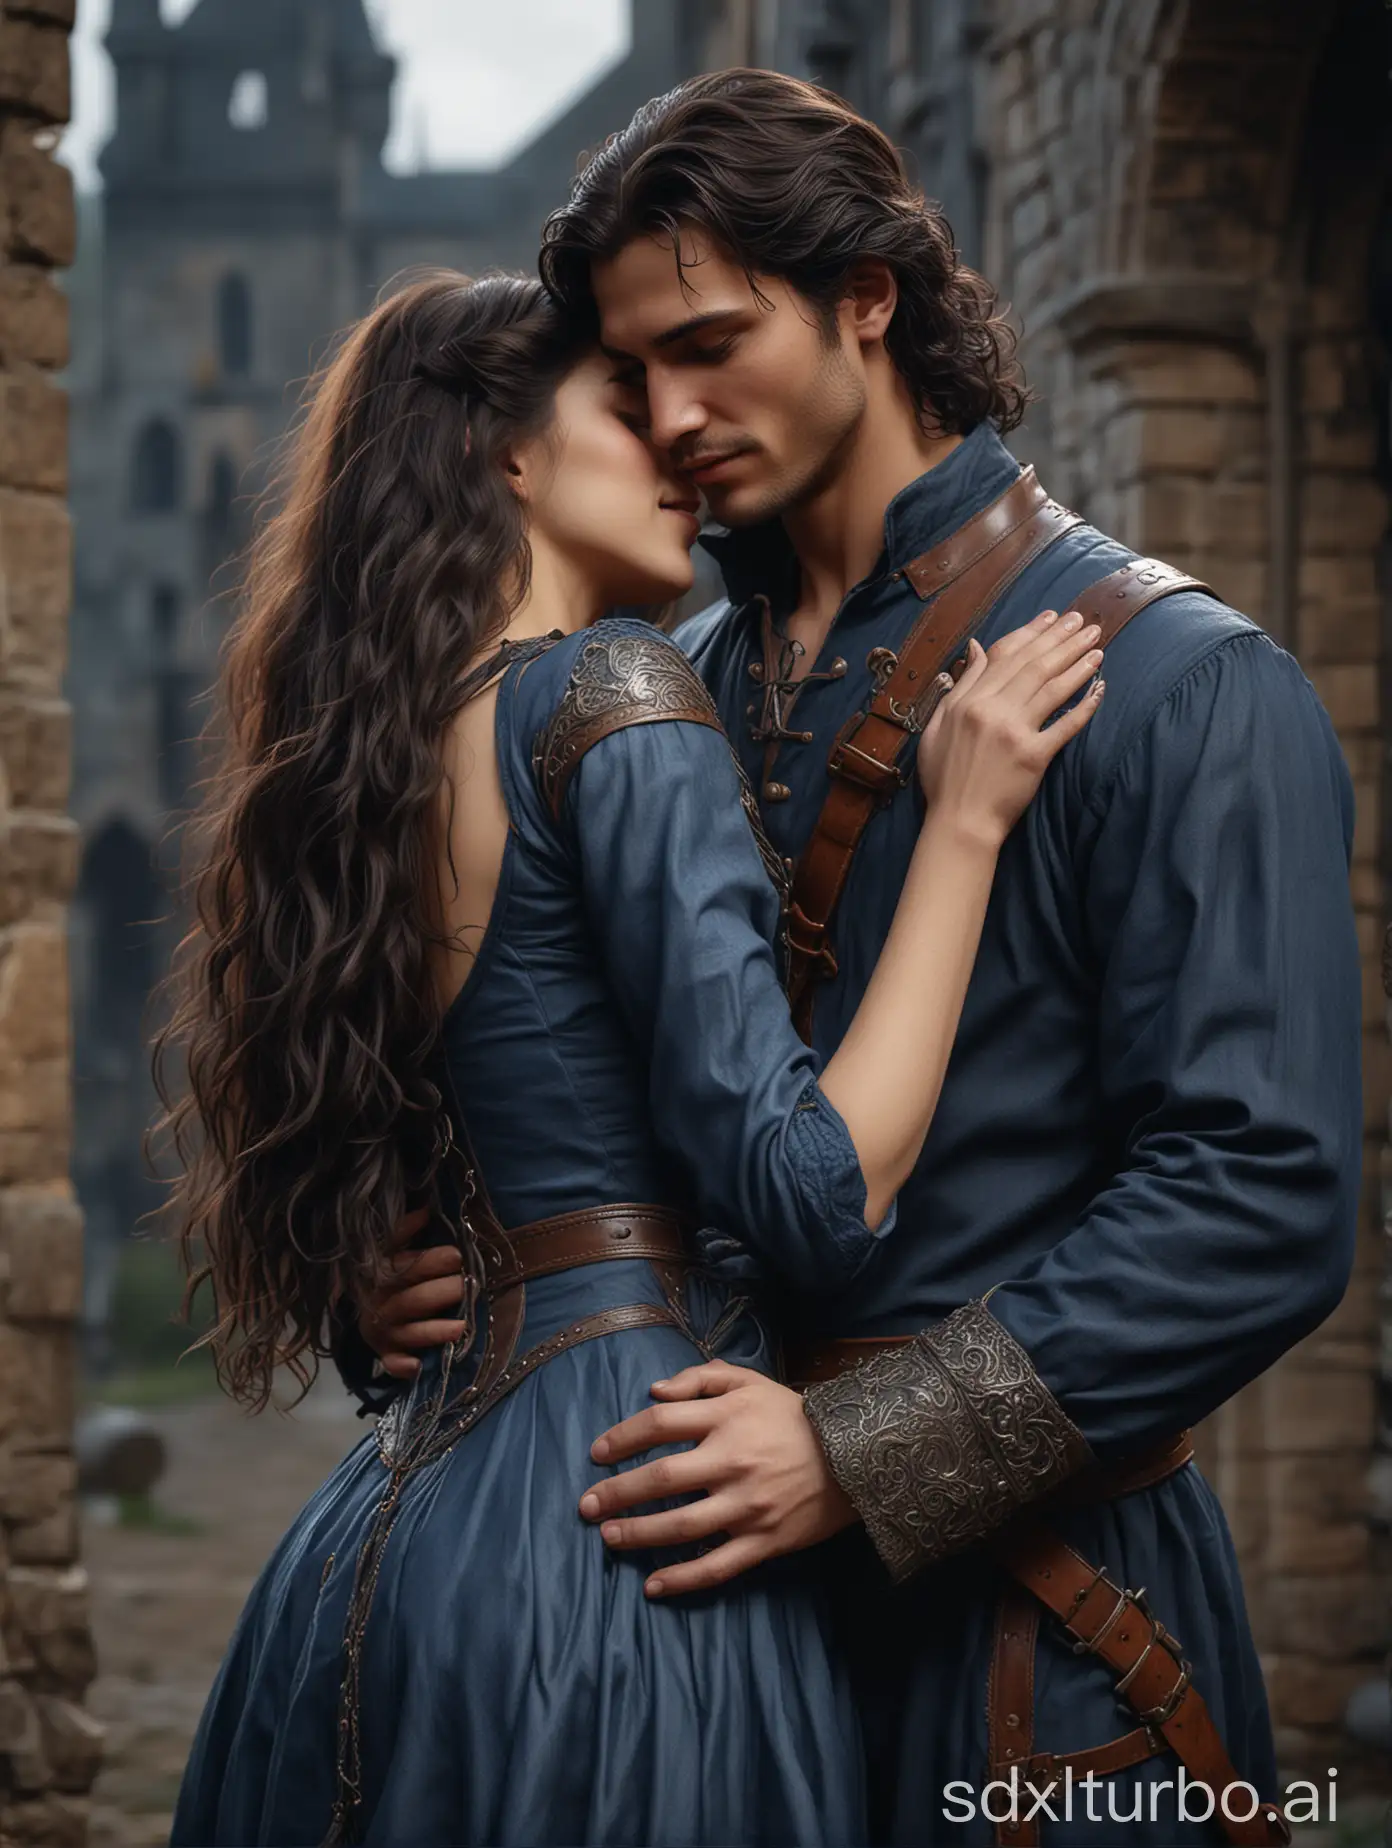 Medieval-Couple-Embracing-in-Rich-Leather-Hunters-Outfit